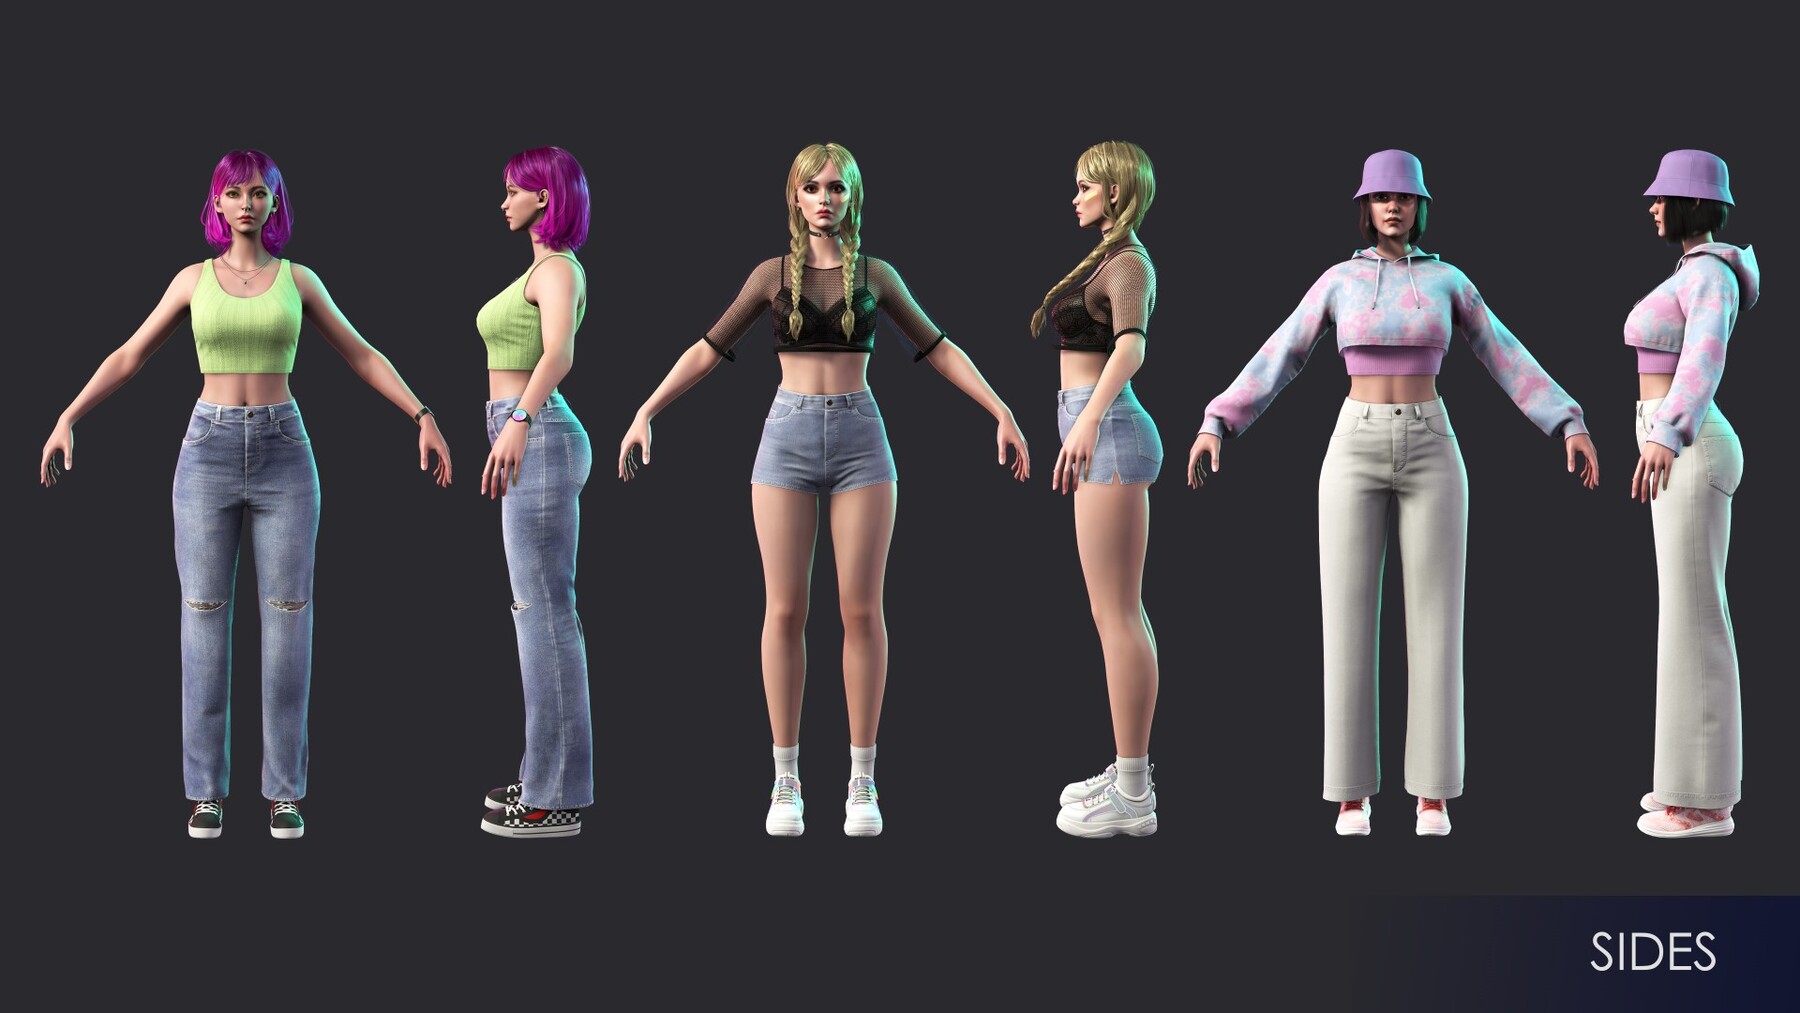 ArtStation - Casual Wear Girls Pack 1 - Game-Ready 3D characters for ...